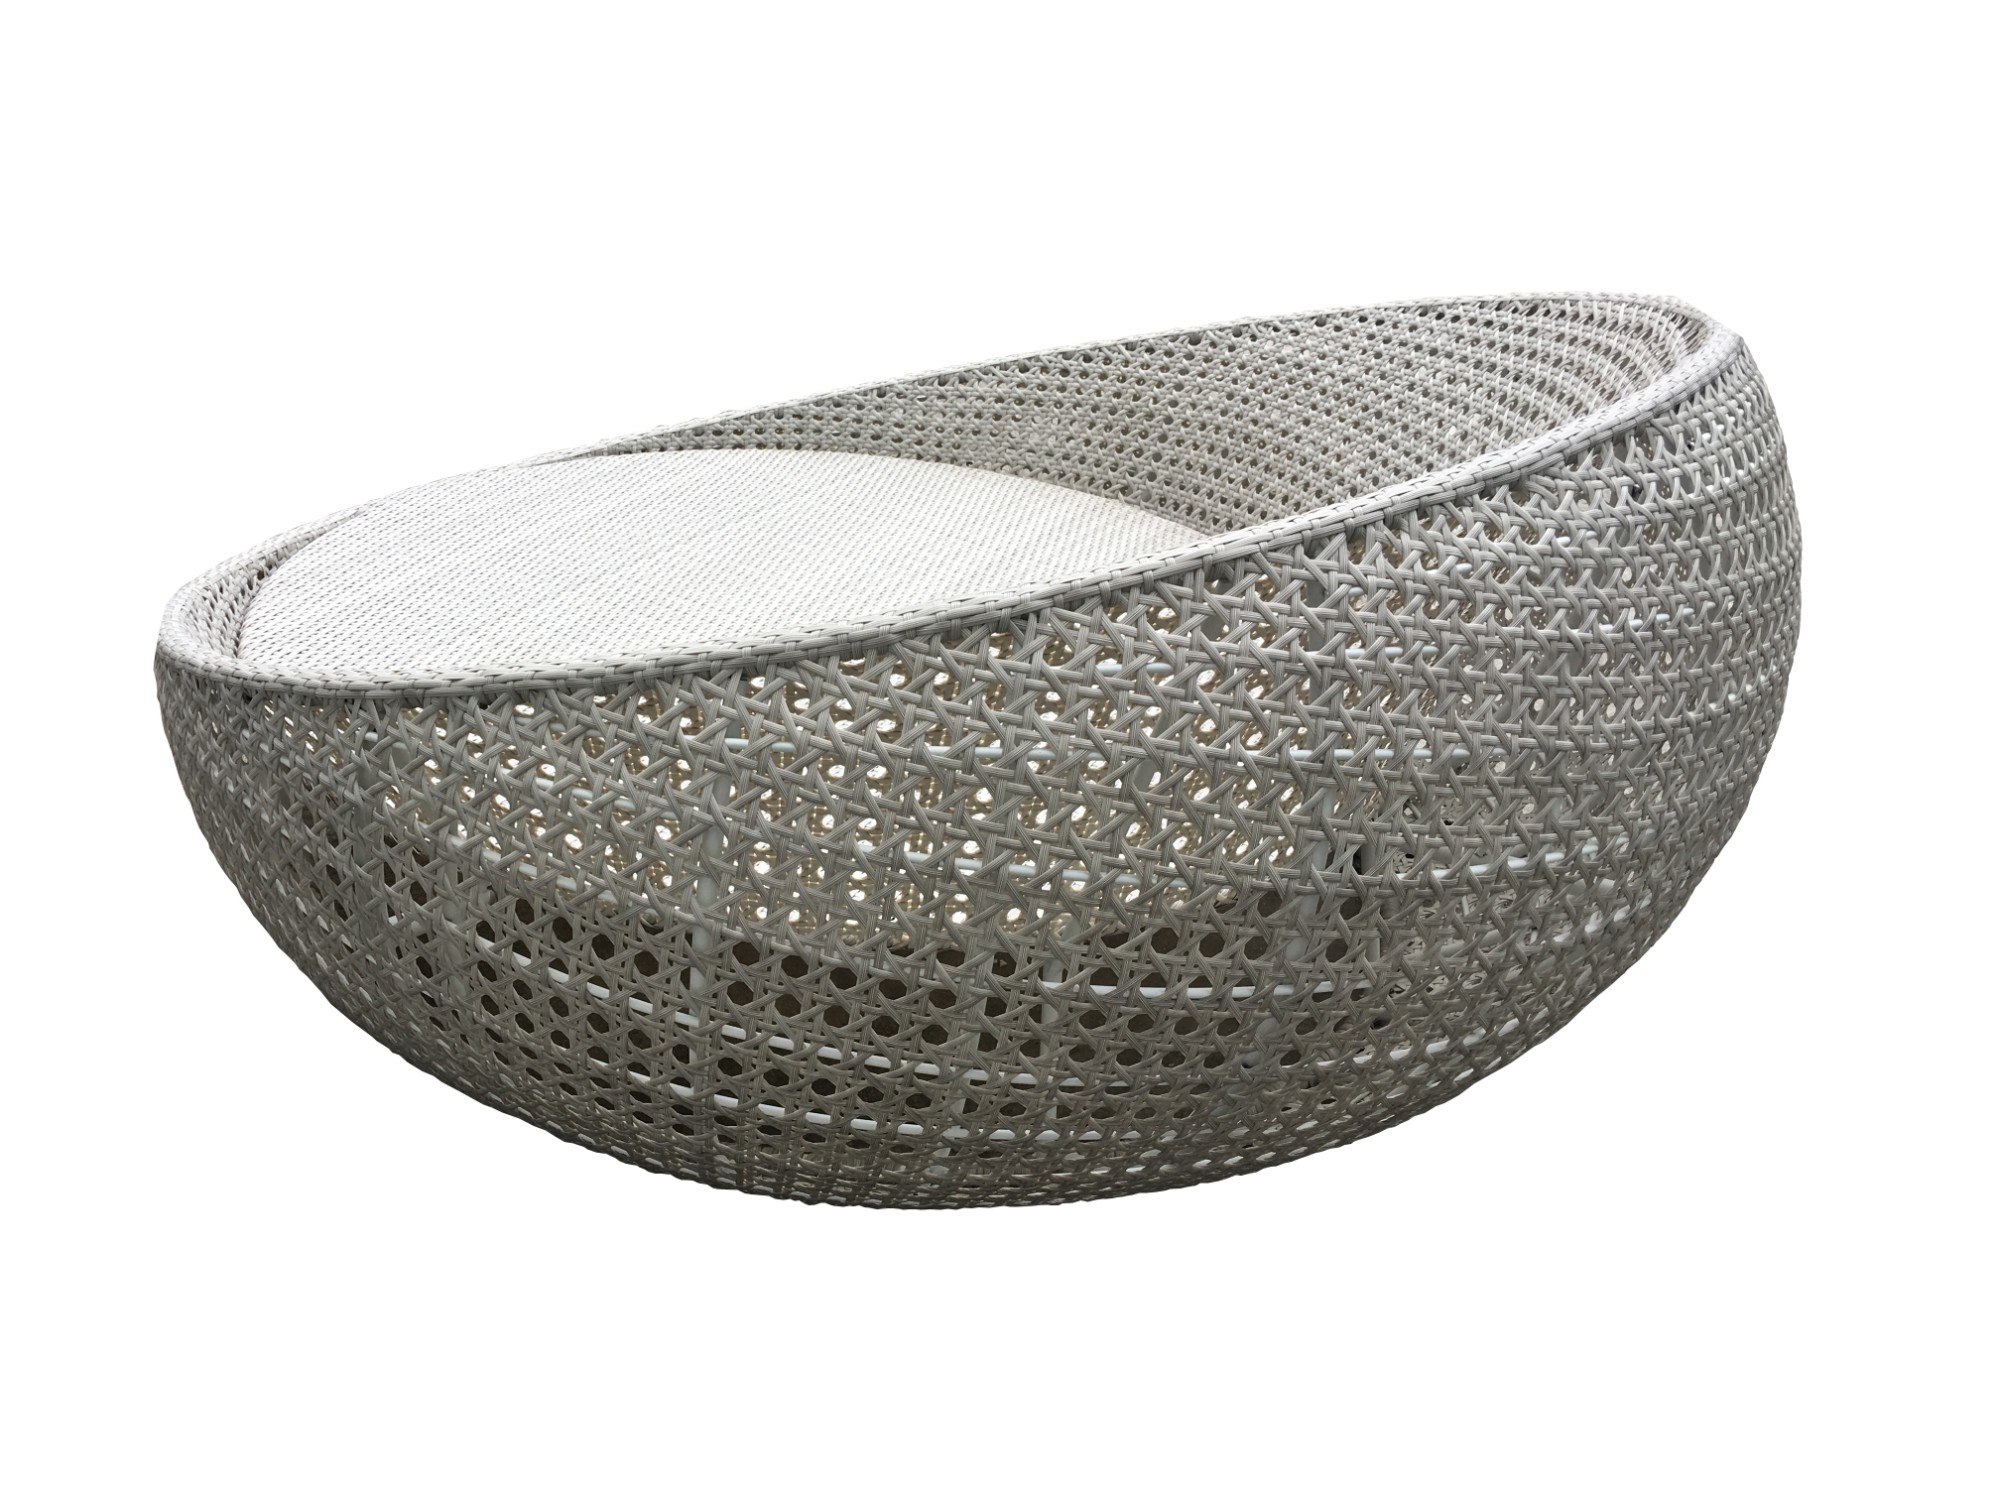 Outdoor wicker daybed / round daybed